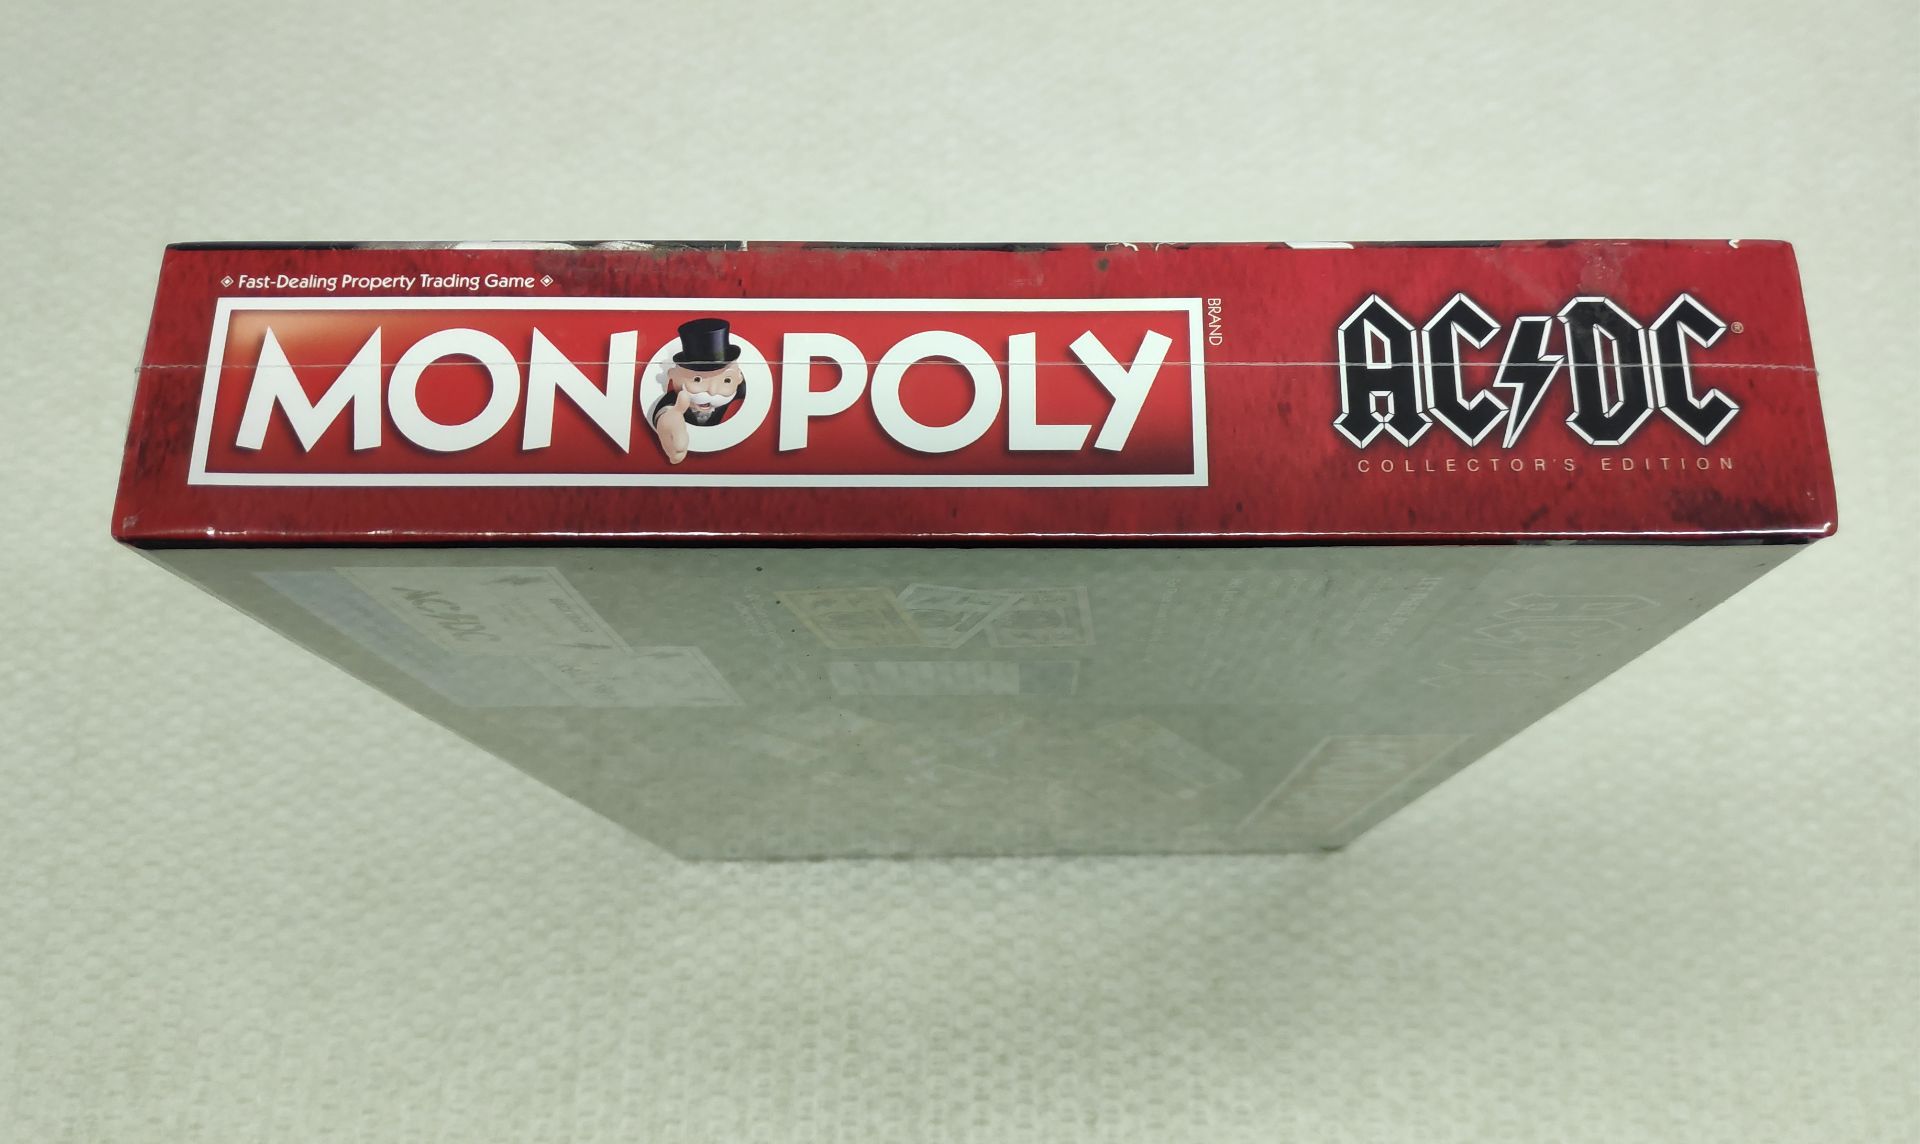 1 x AC/DC Collector's Edition Monopoly - New/Sealed - HTYS169 - CL720 - Location: Altrincham WA14<BR - Image 5 of 8